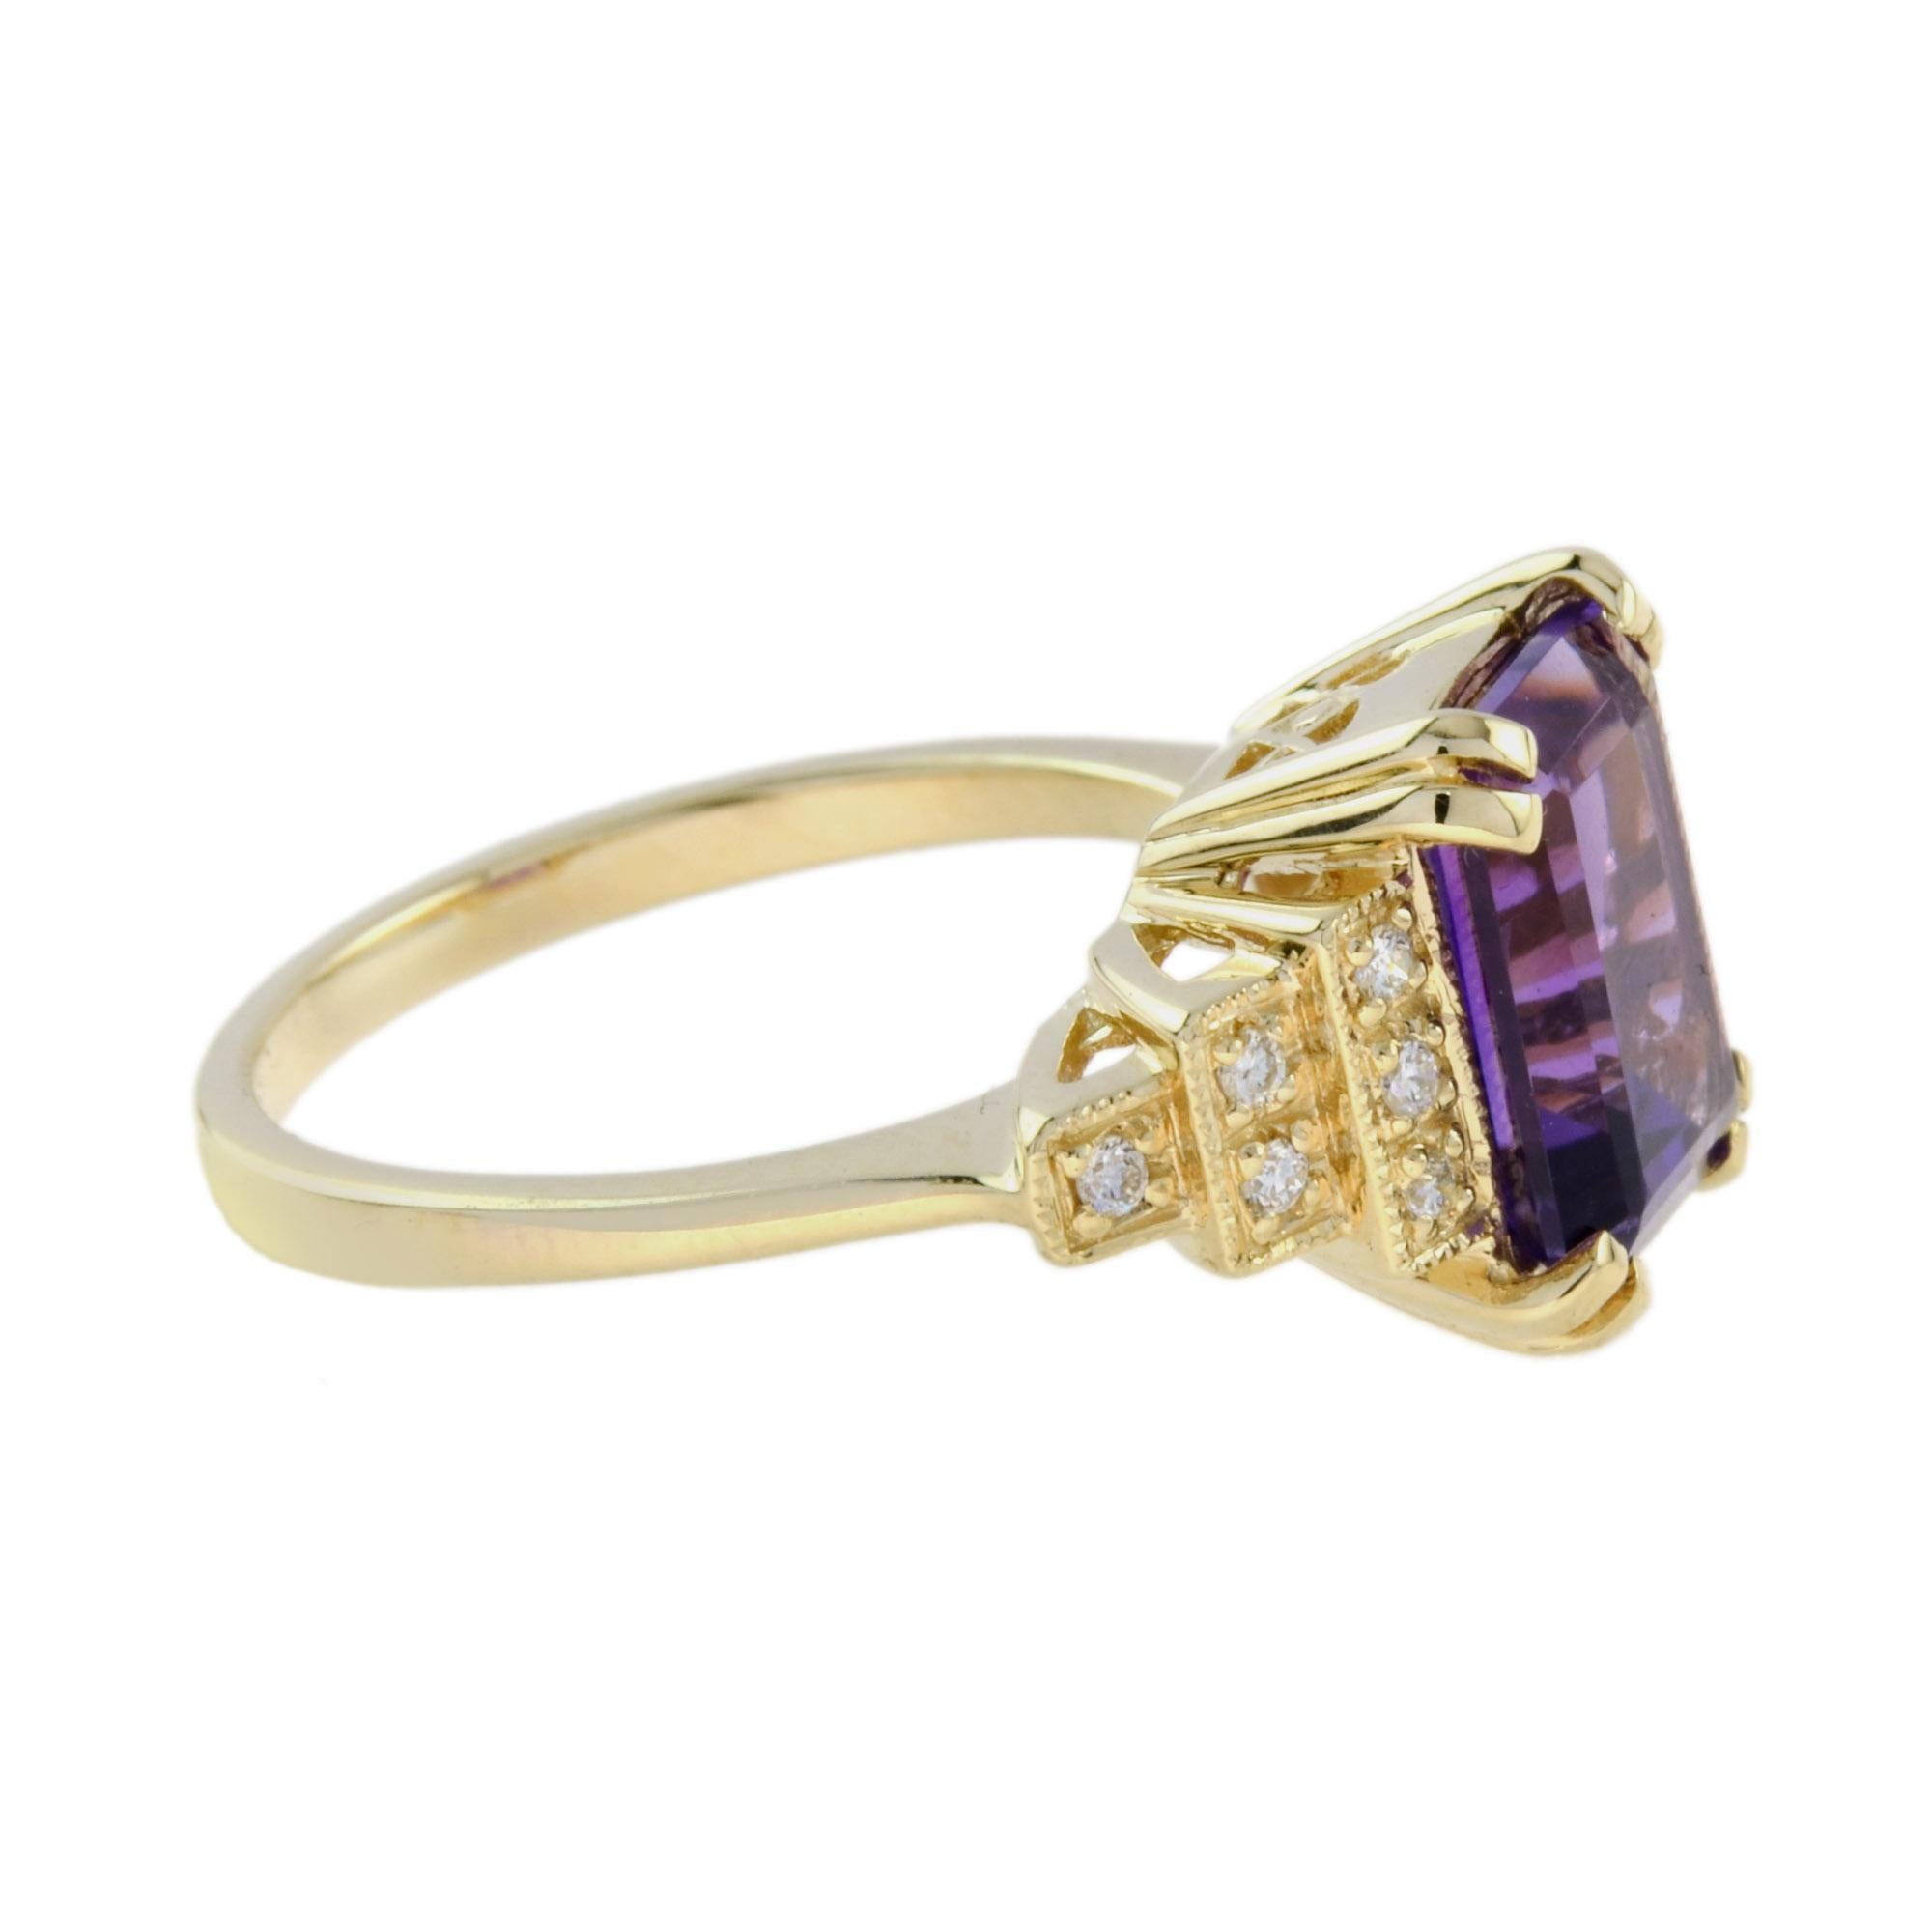 For Sale:  Emerald Cut Amethyst and Diamond Step Shoulder Engagement Ring in 14K Gold 4